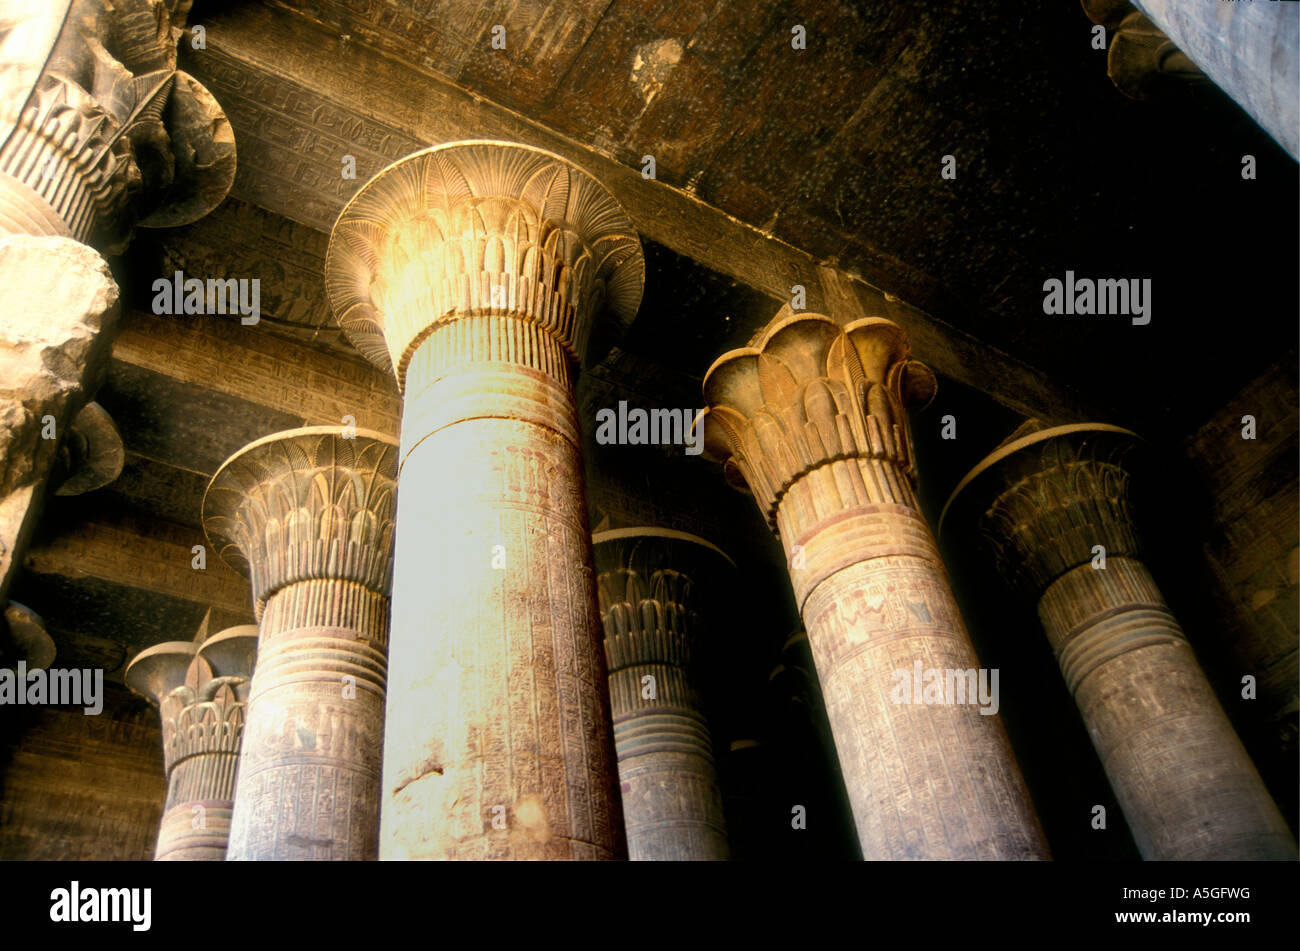 Detail of pillars and capitals in the Temple of Edfu on the banks of the river Nile Egypt north Africa Stock Photo